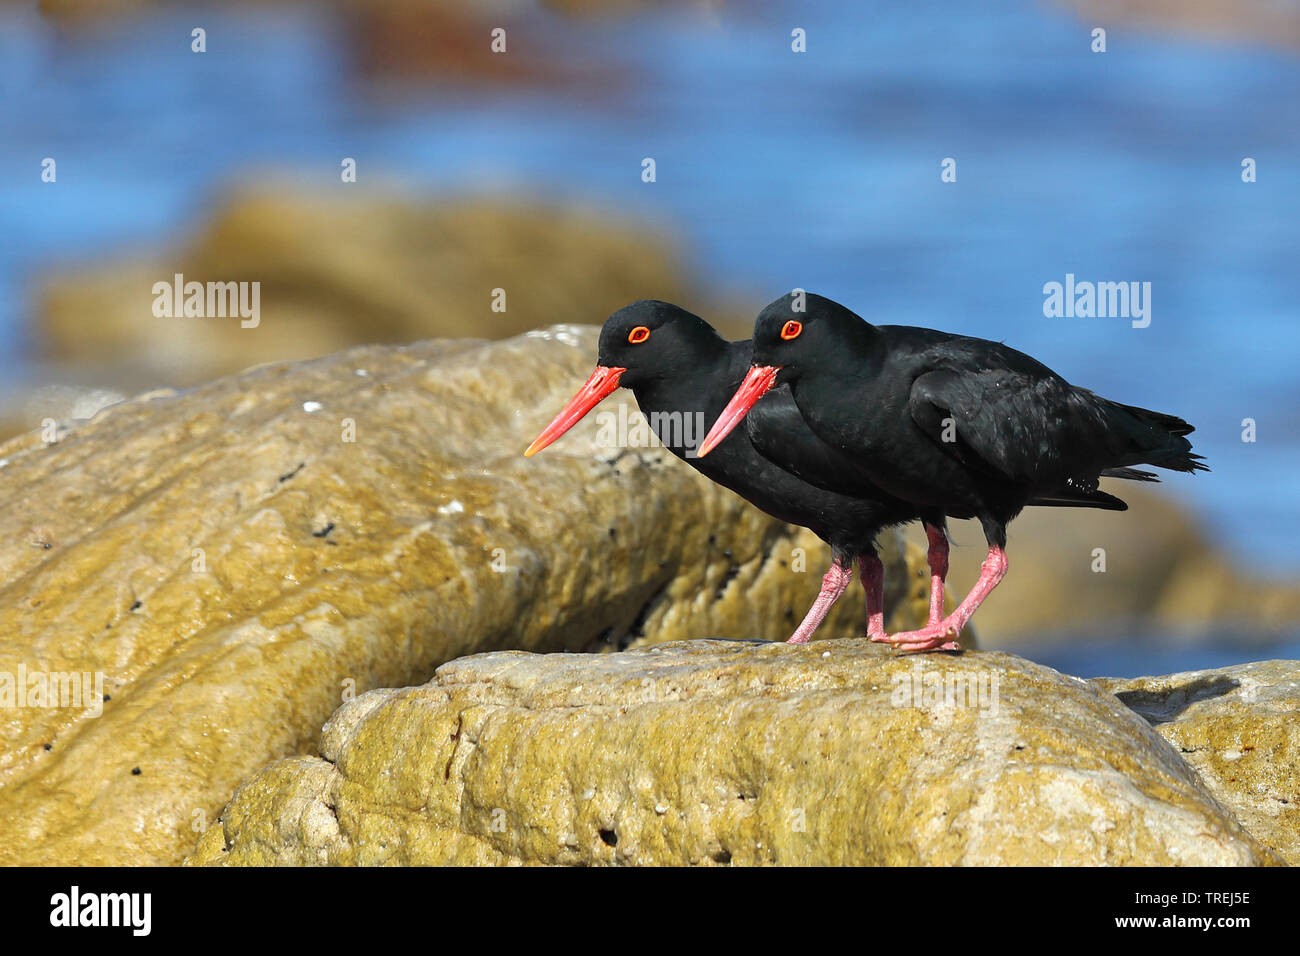 African black oystercatcher (Haematopus moquini), cople ona rock on shore, South Africa, Western Cape, Cape of Good Hope National Park Stock Photo